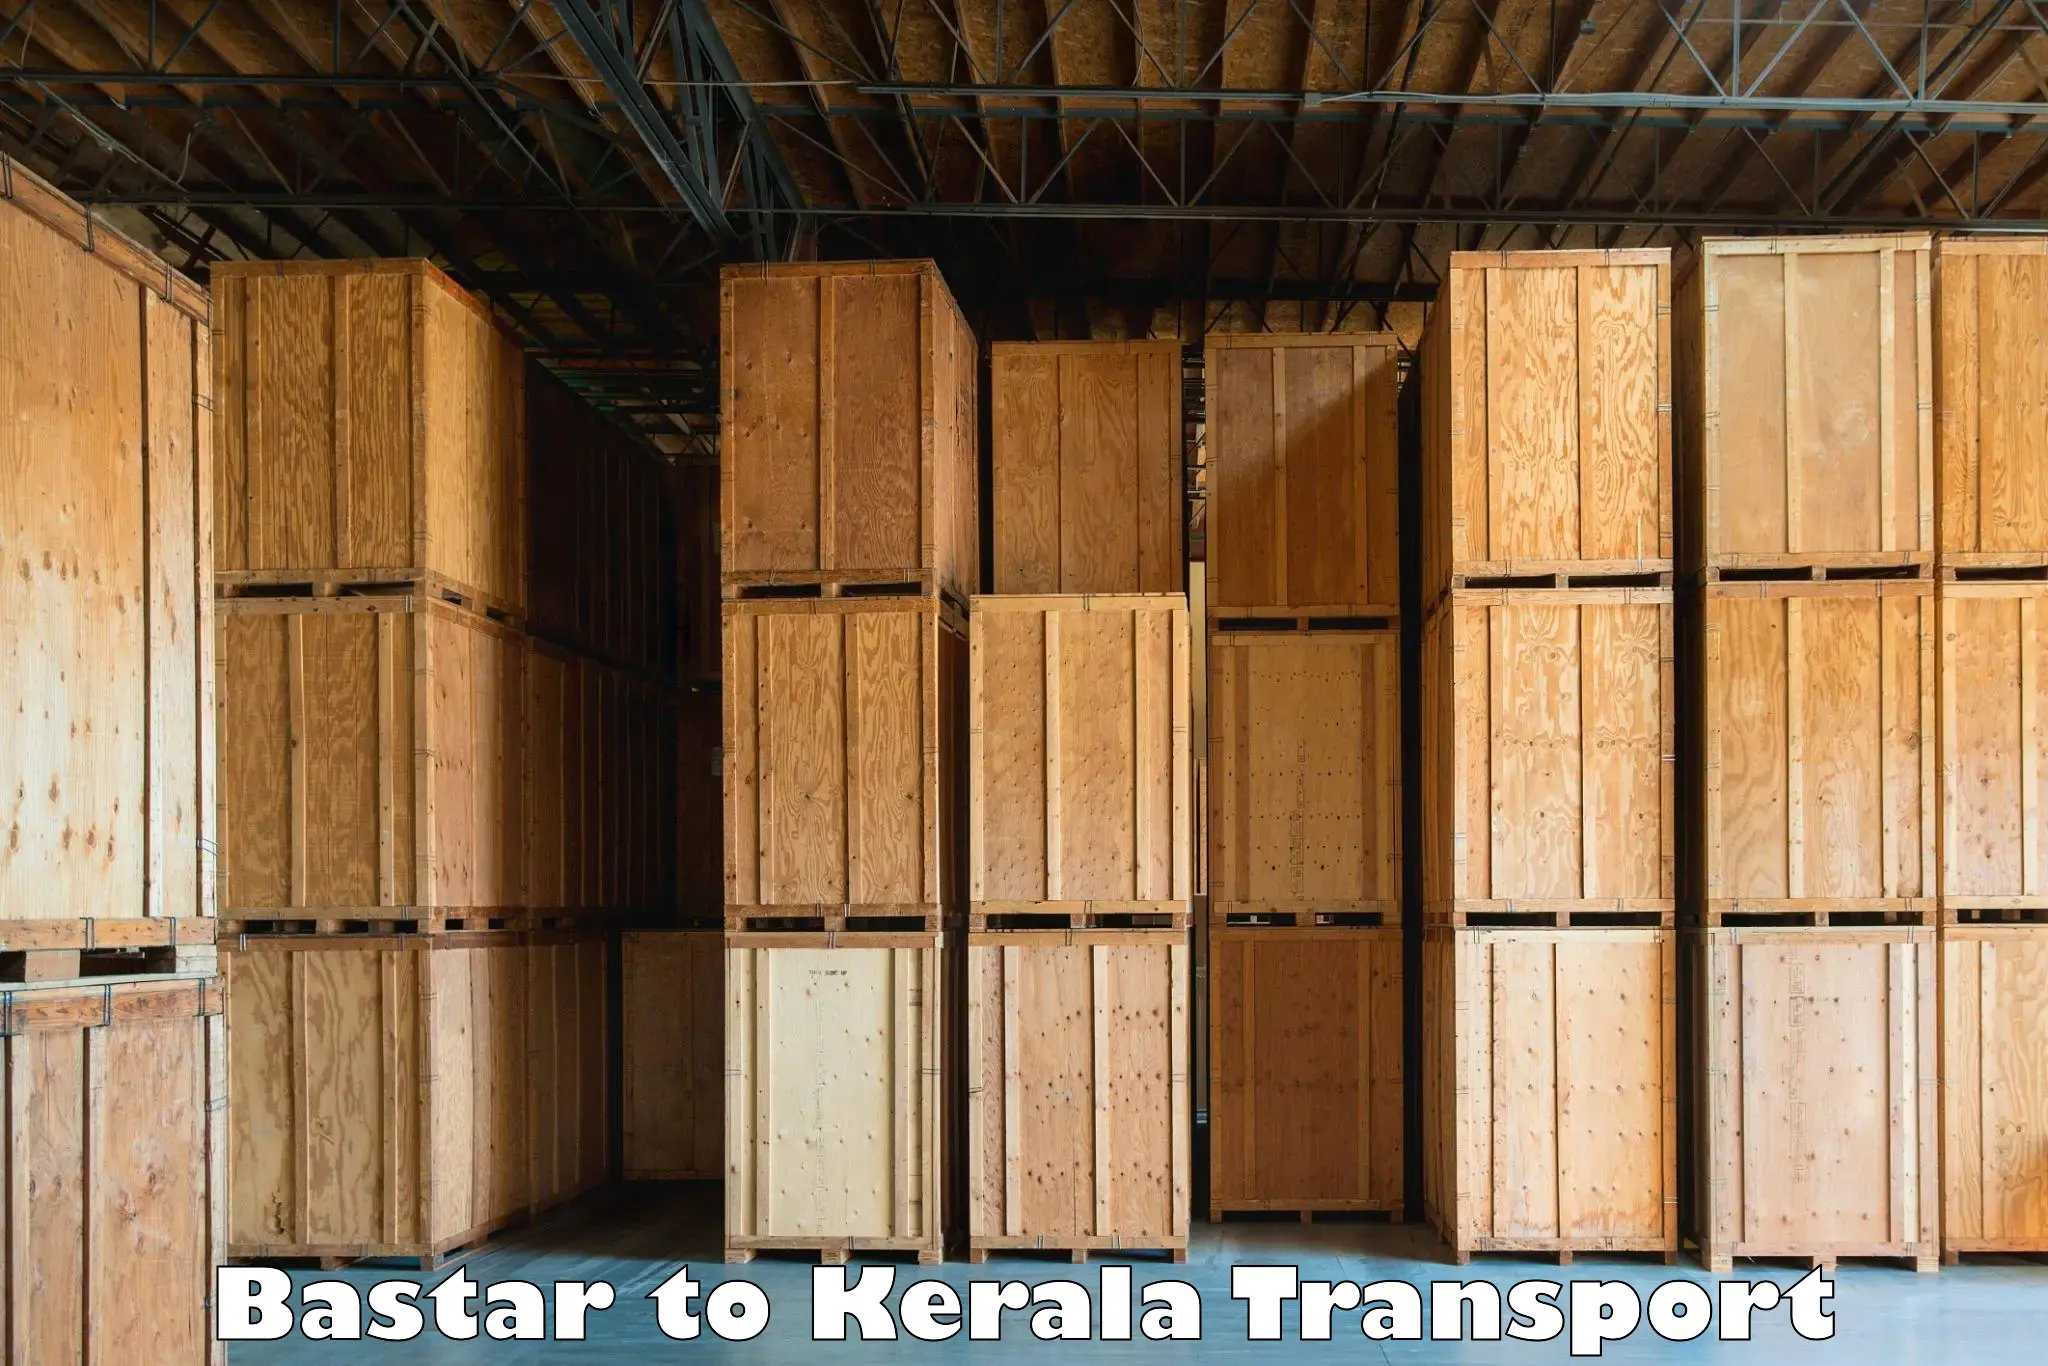 Container transport service Bastar to Alappuzha